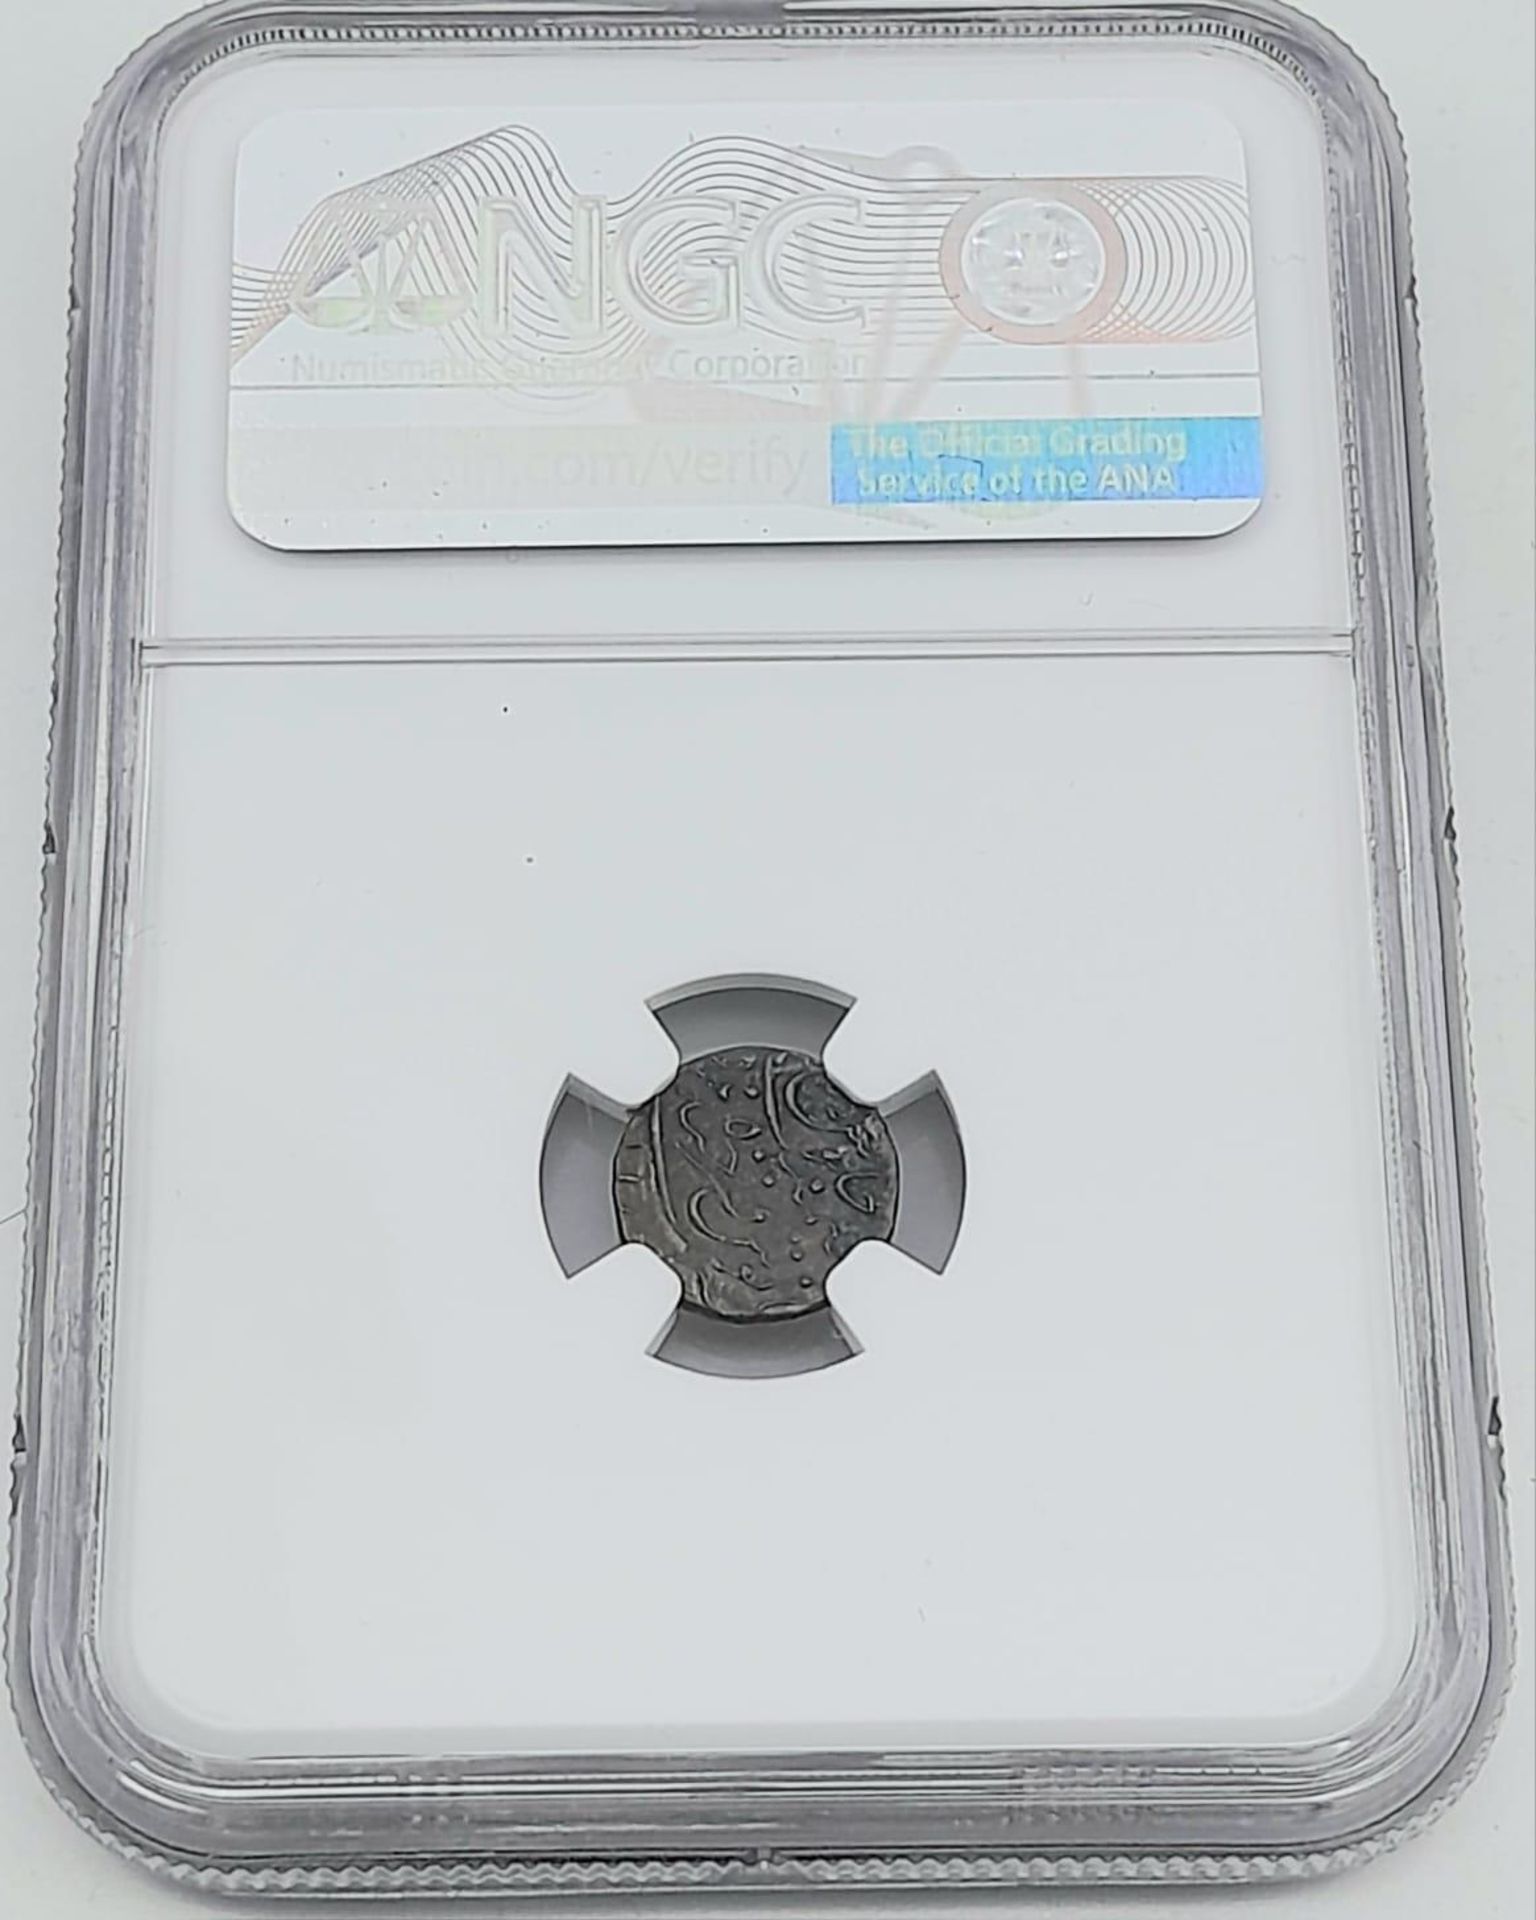 An NGC 1889 Indian 1/8 Rupee Silver Coin - Hyderabad Mint. Comes in a protective hard plastic wallet - Image 8 of 8